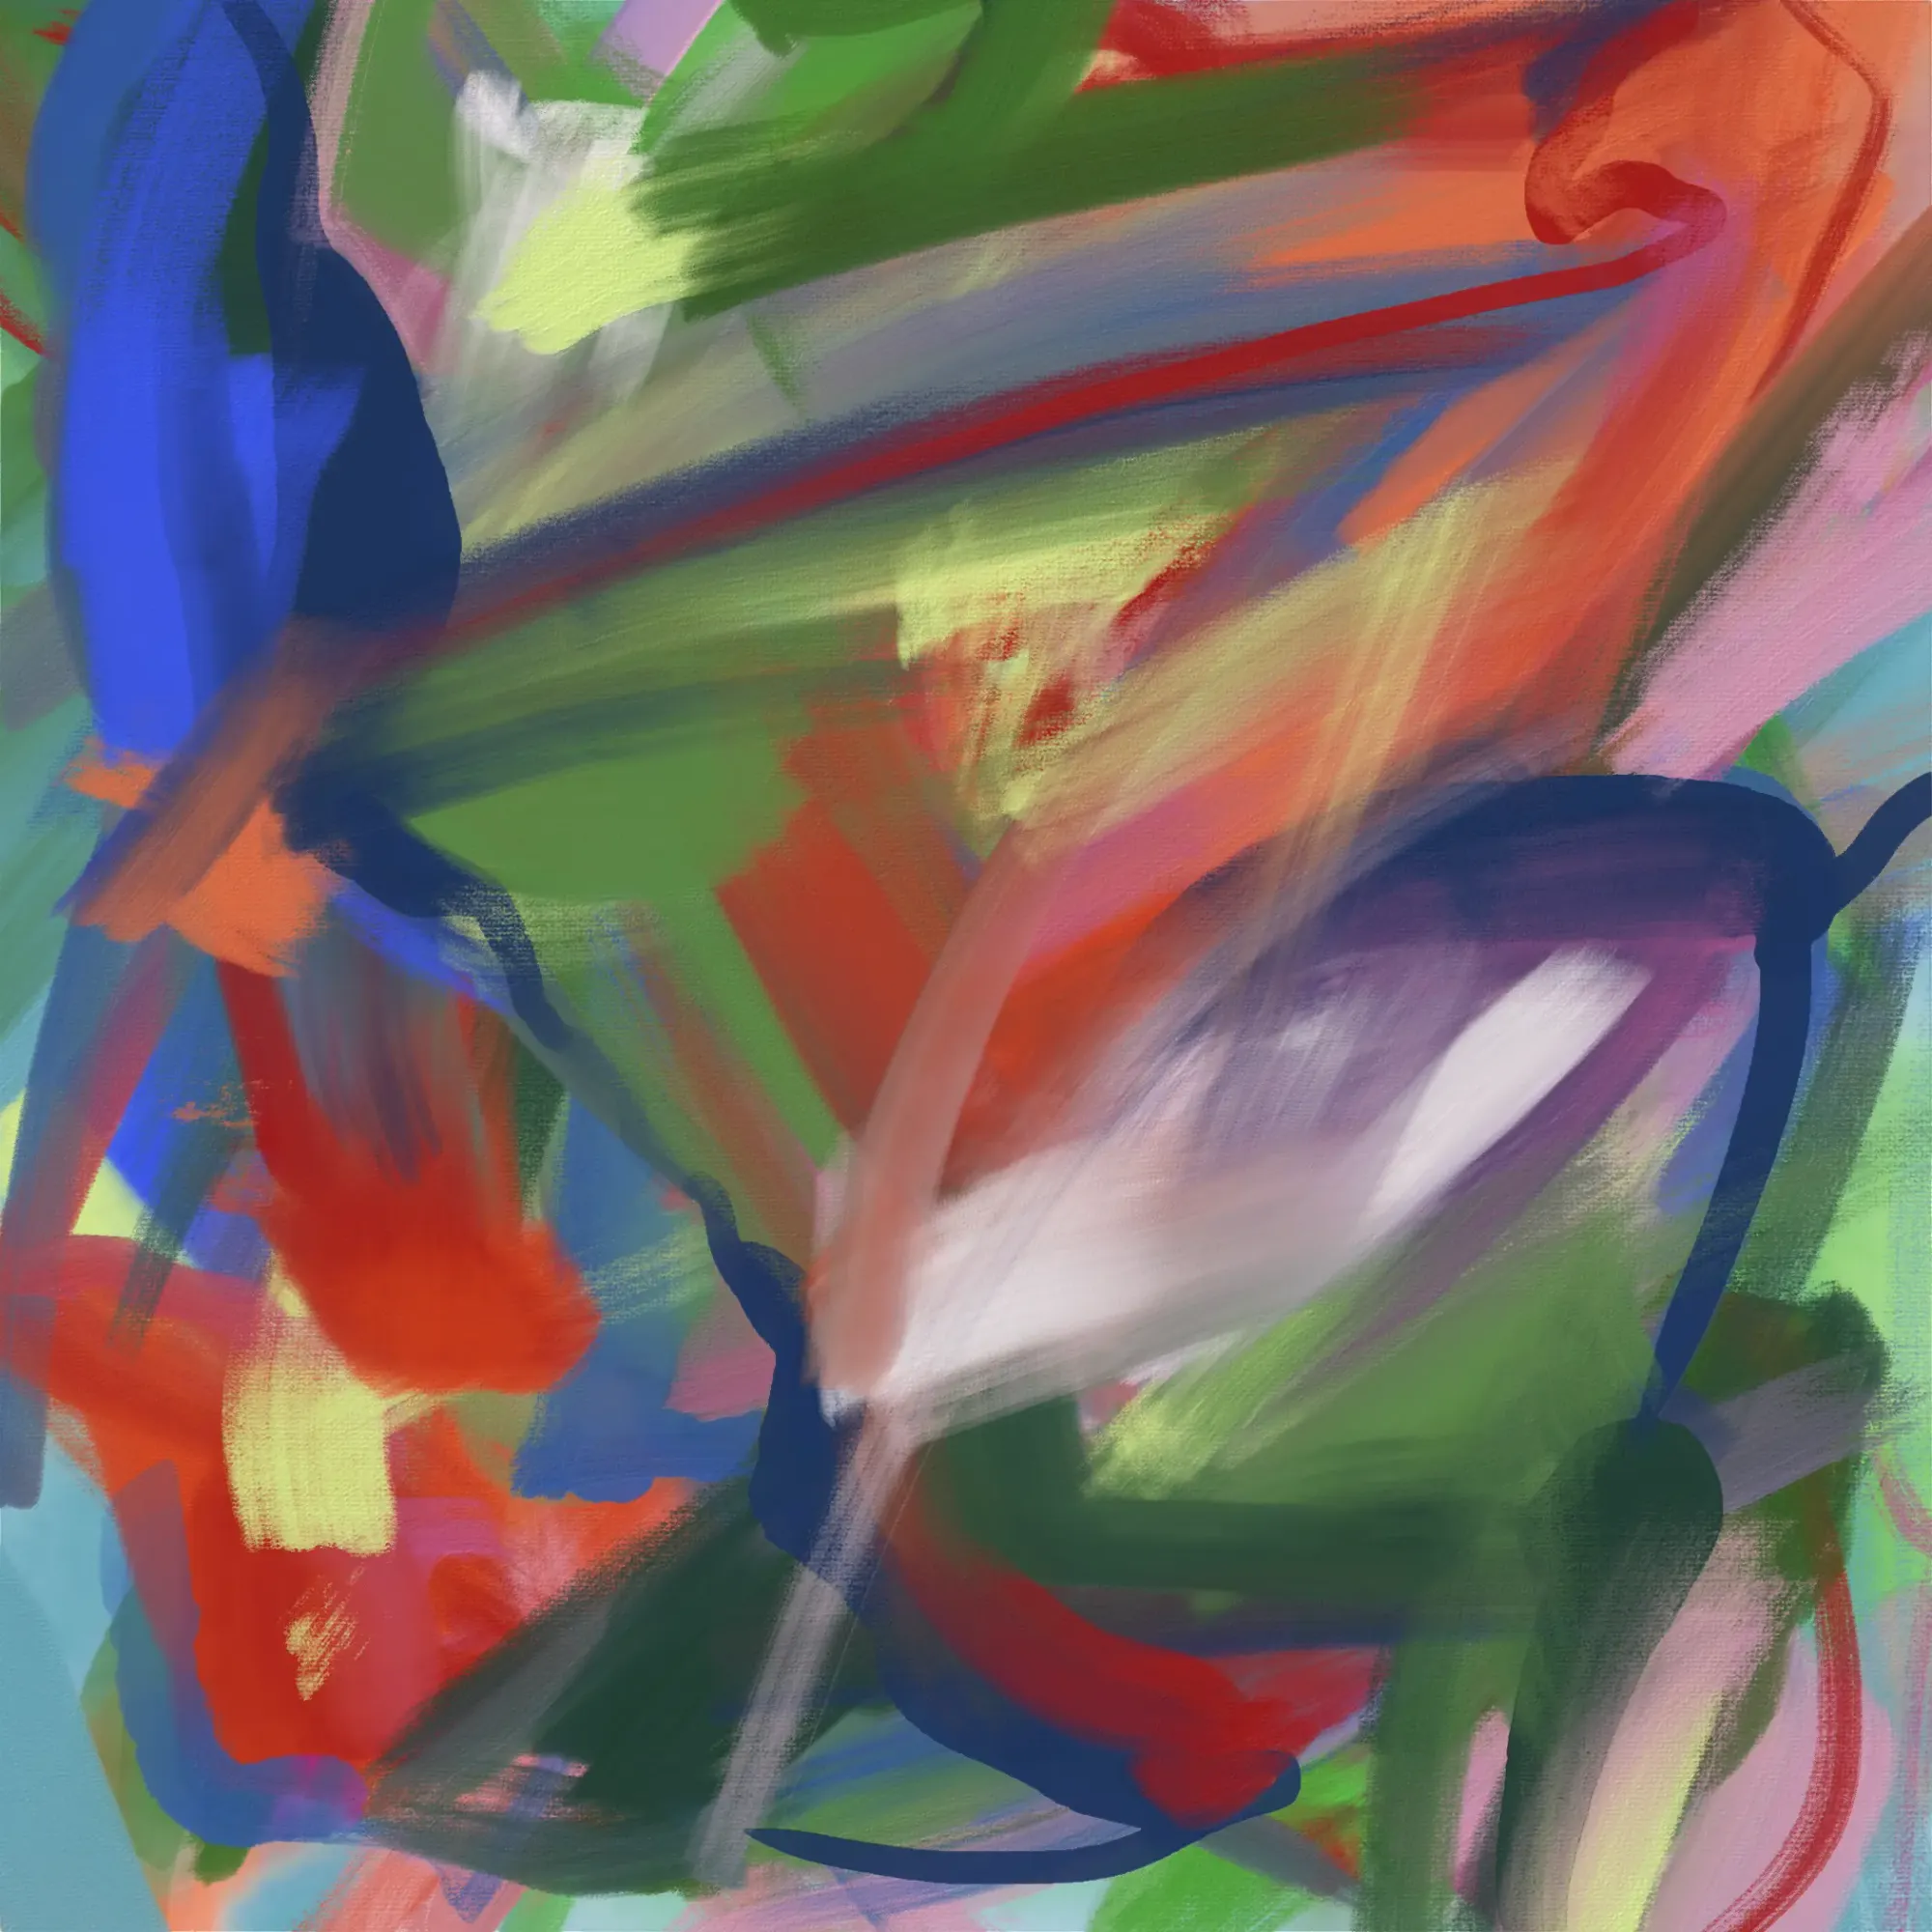 An abstract digital painting titled "Fallback 3," a square multi-colored composition.